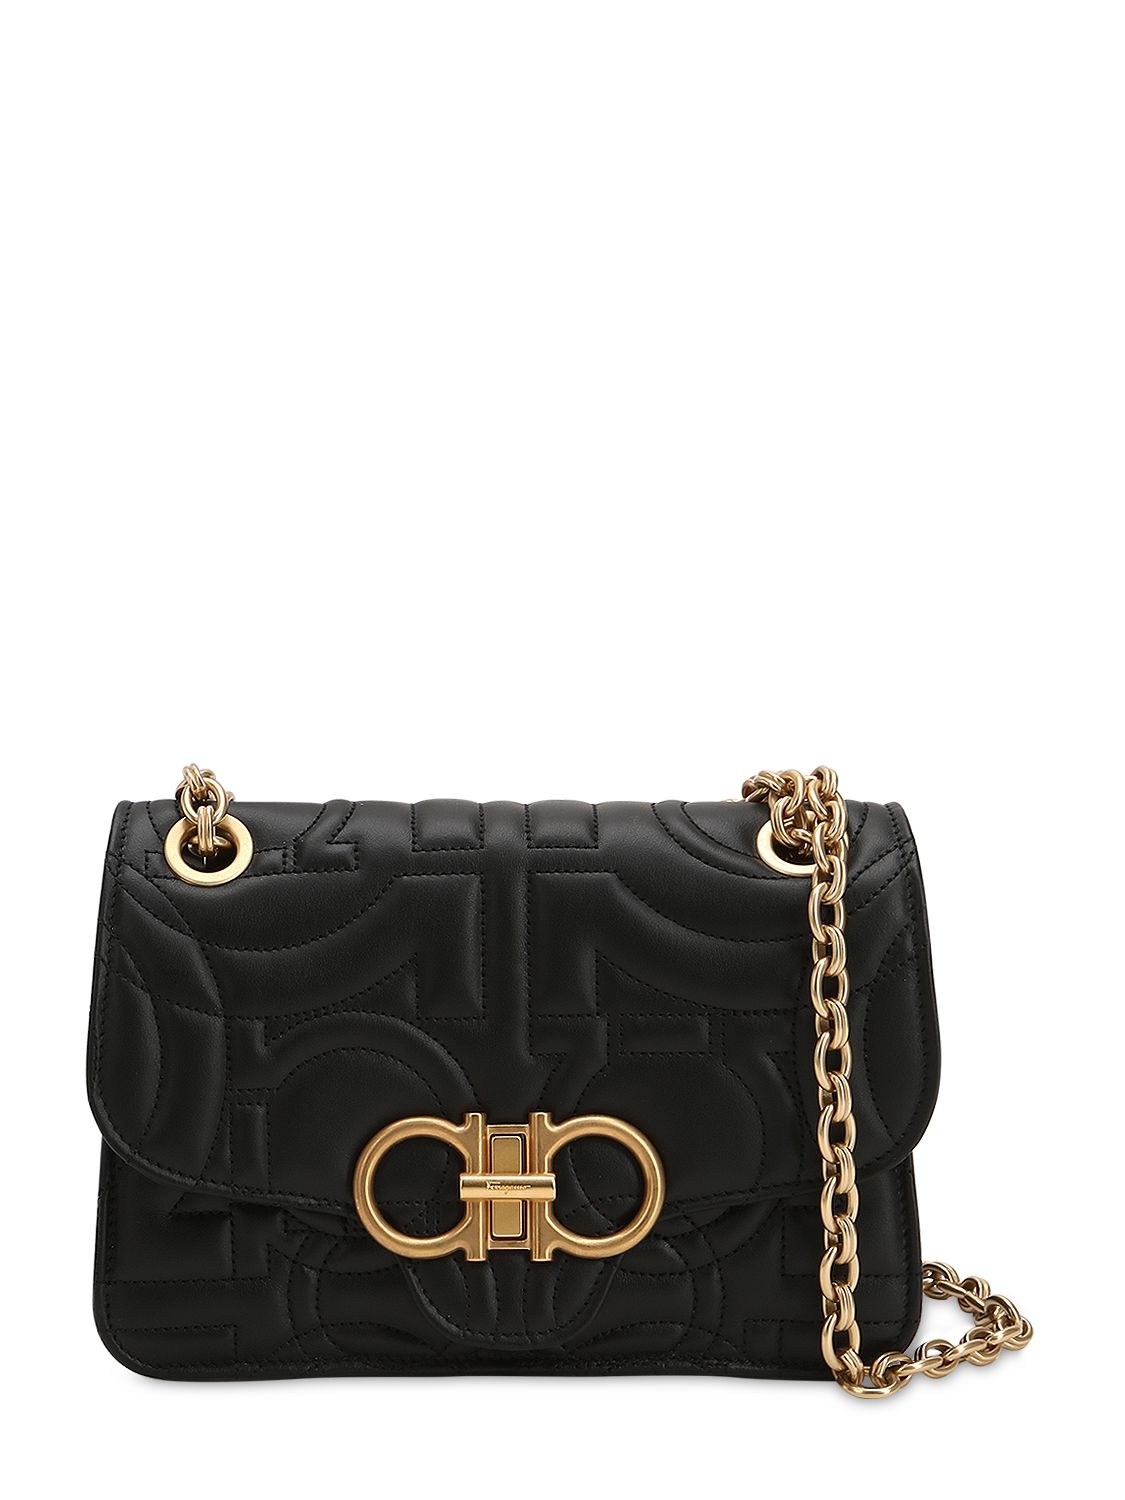 Ferragamo Small Quilted Leather Shoulder Bag In Black